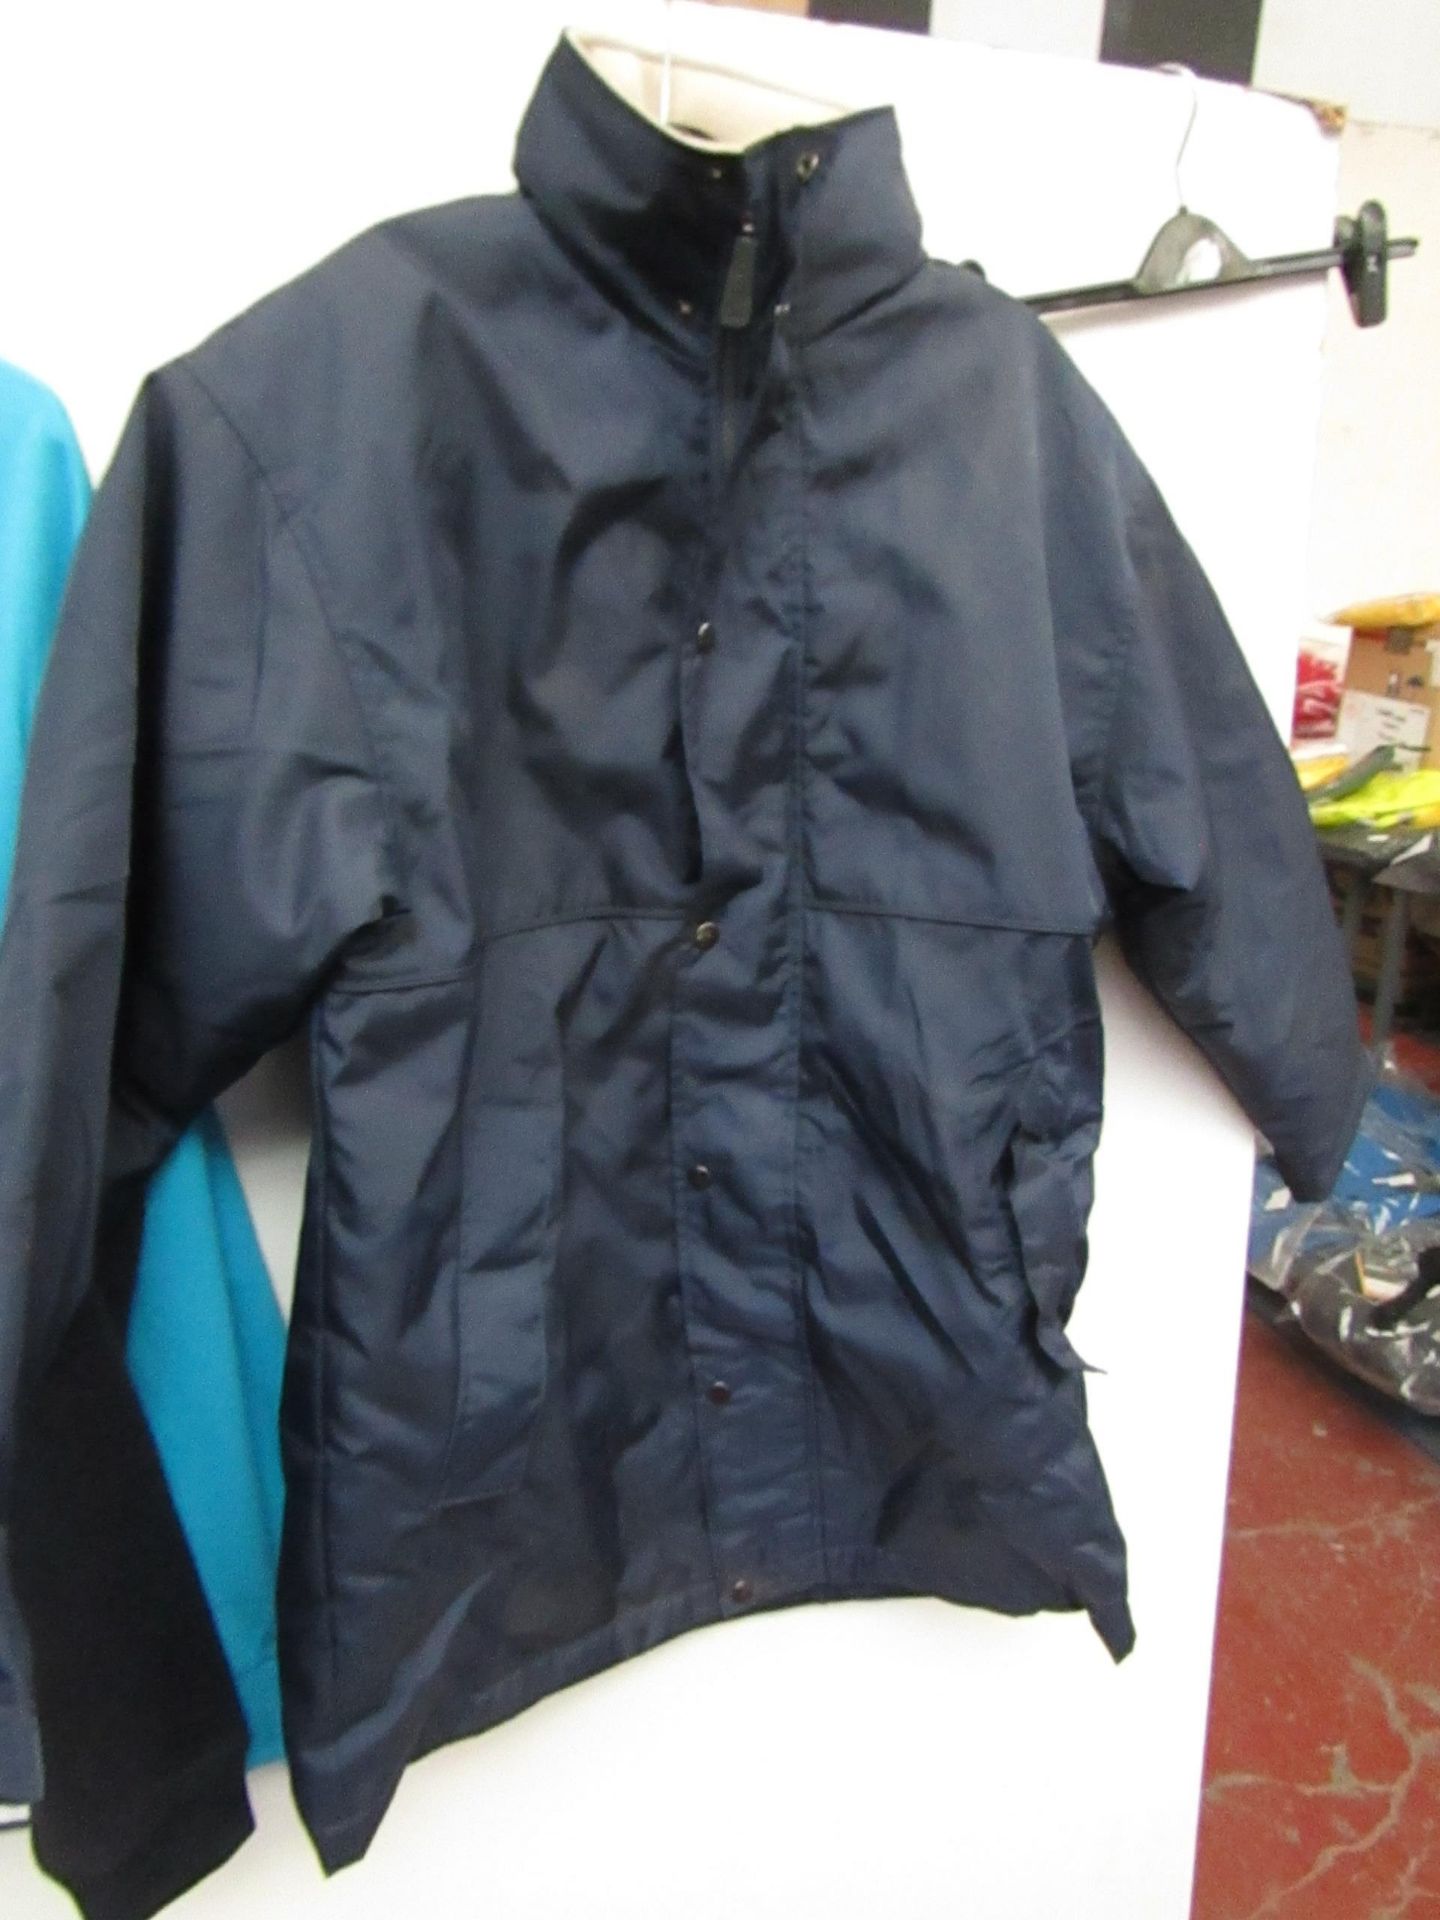 Mens Outdoor Jacket Size S, New with Tags